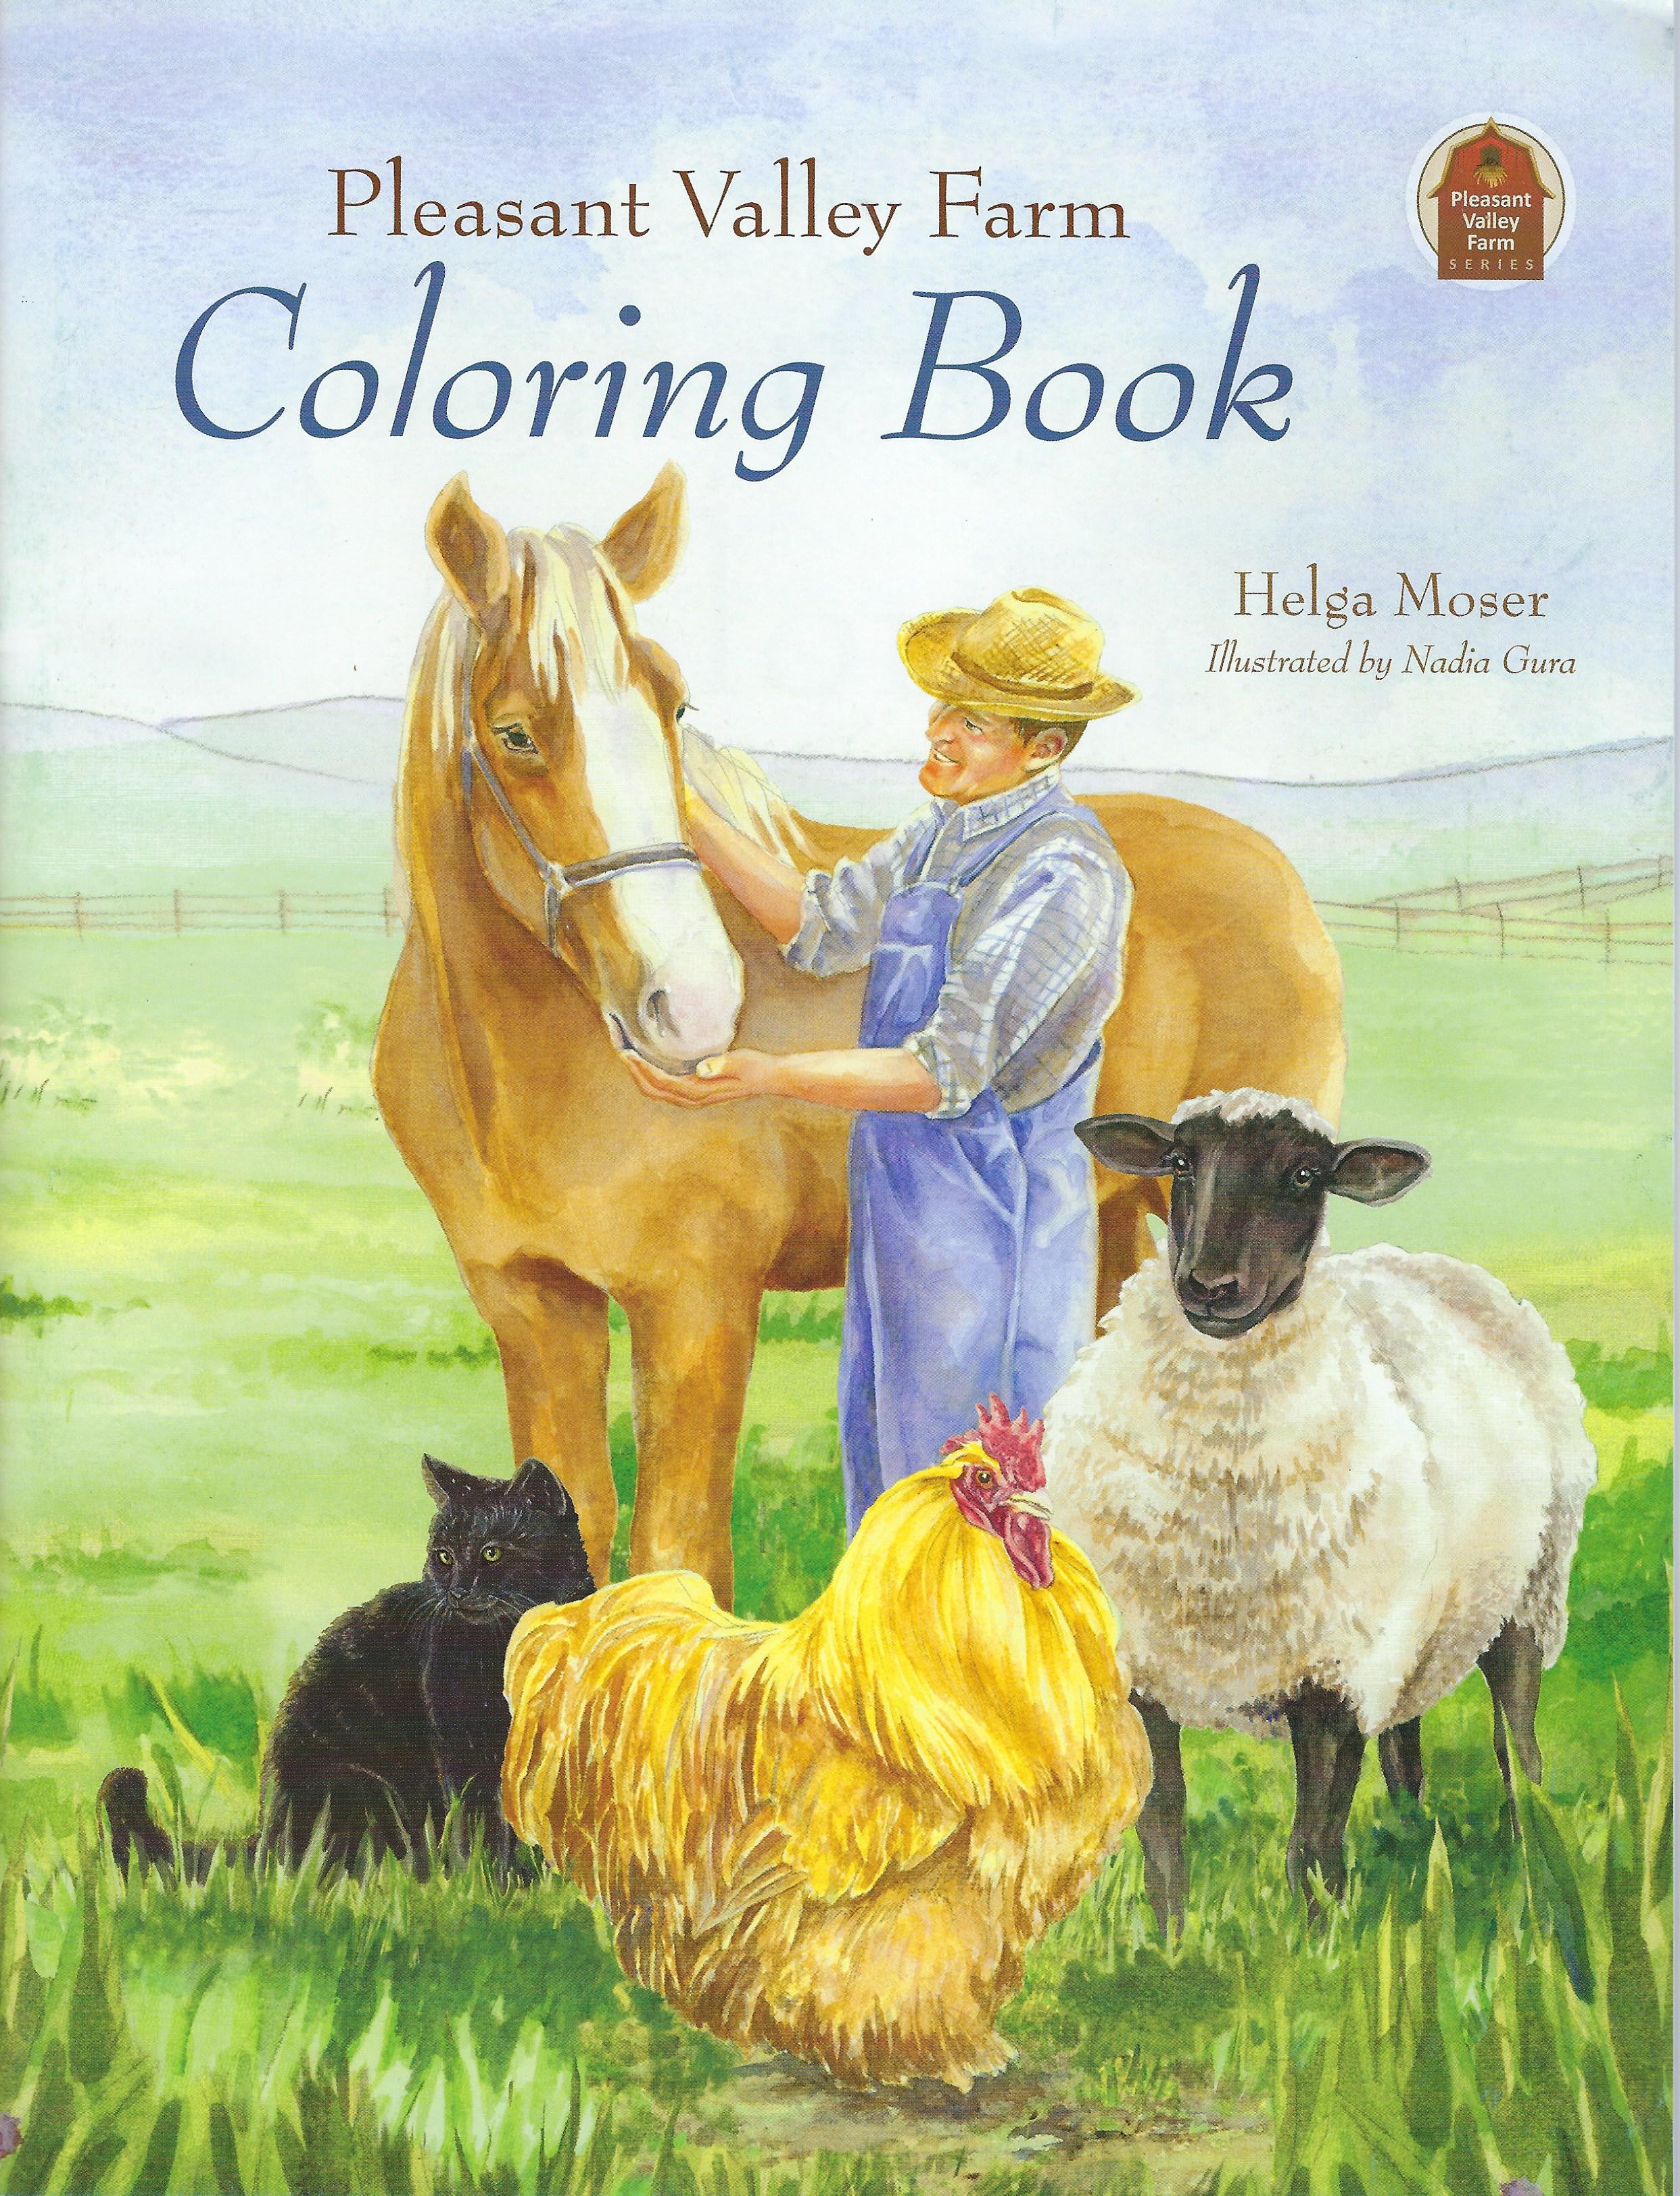 Coloring/Activity Books